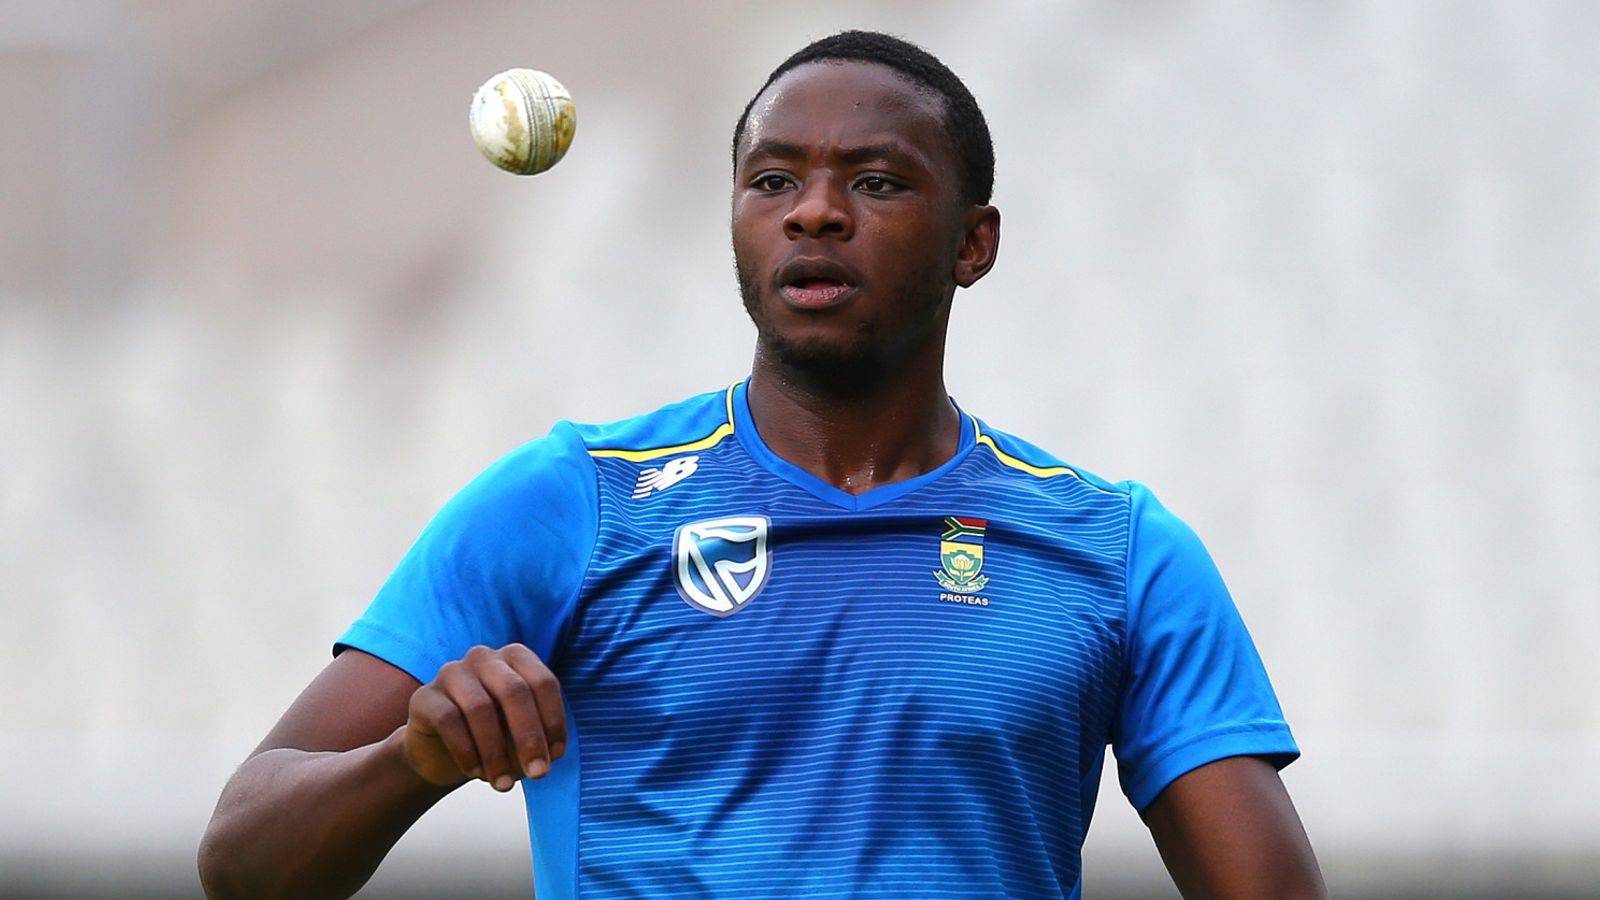 Kagiso Rabada returns to South Africa squad for ODI and T20I series